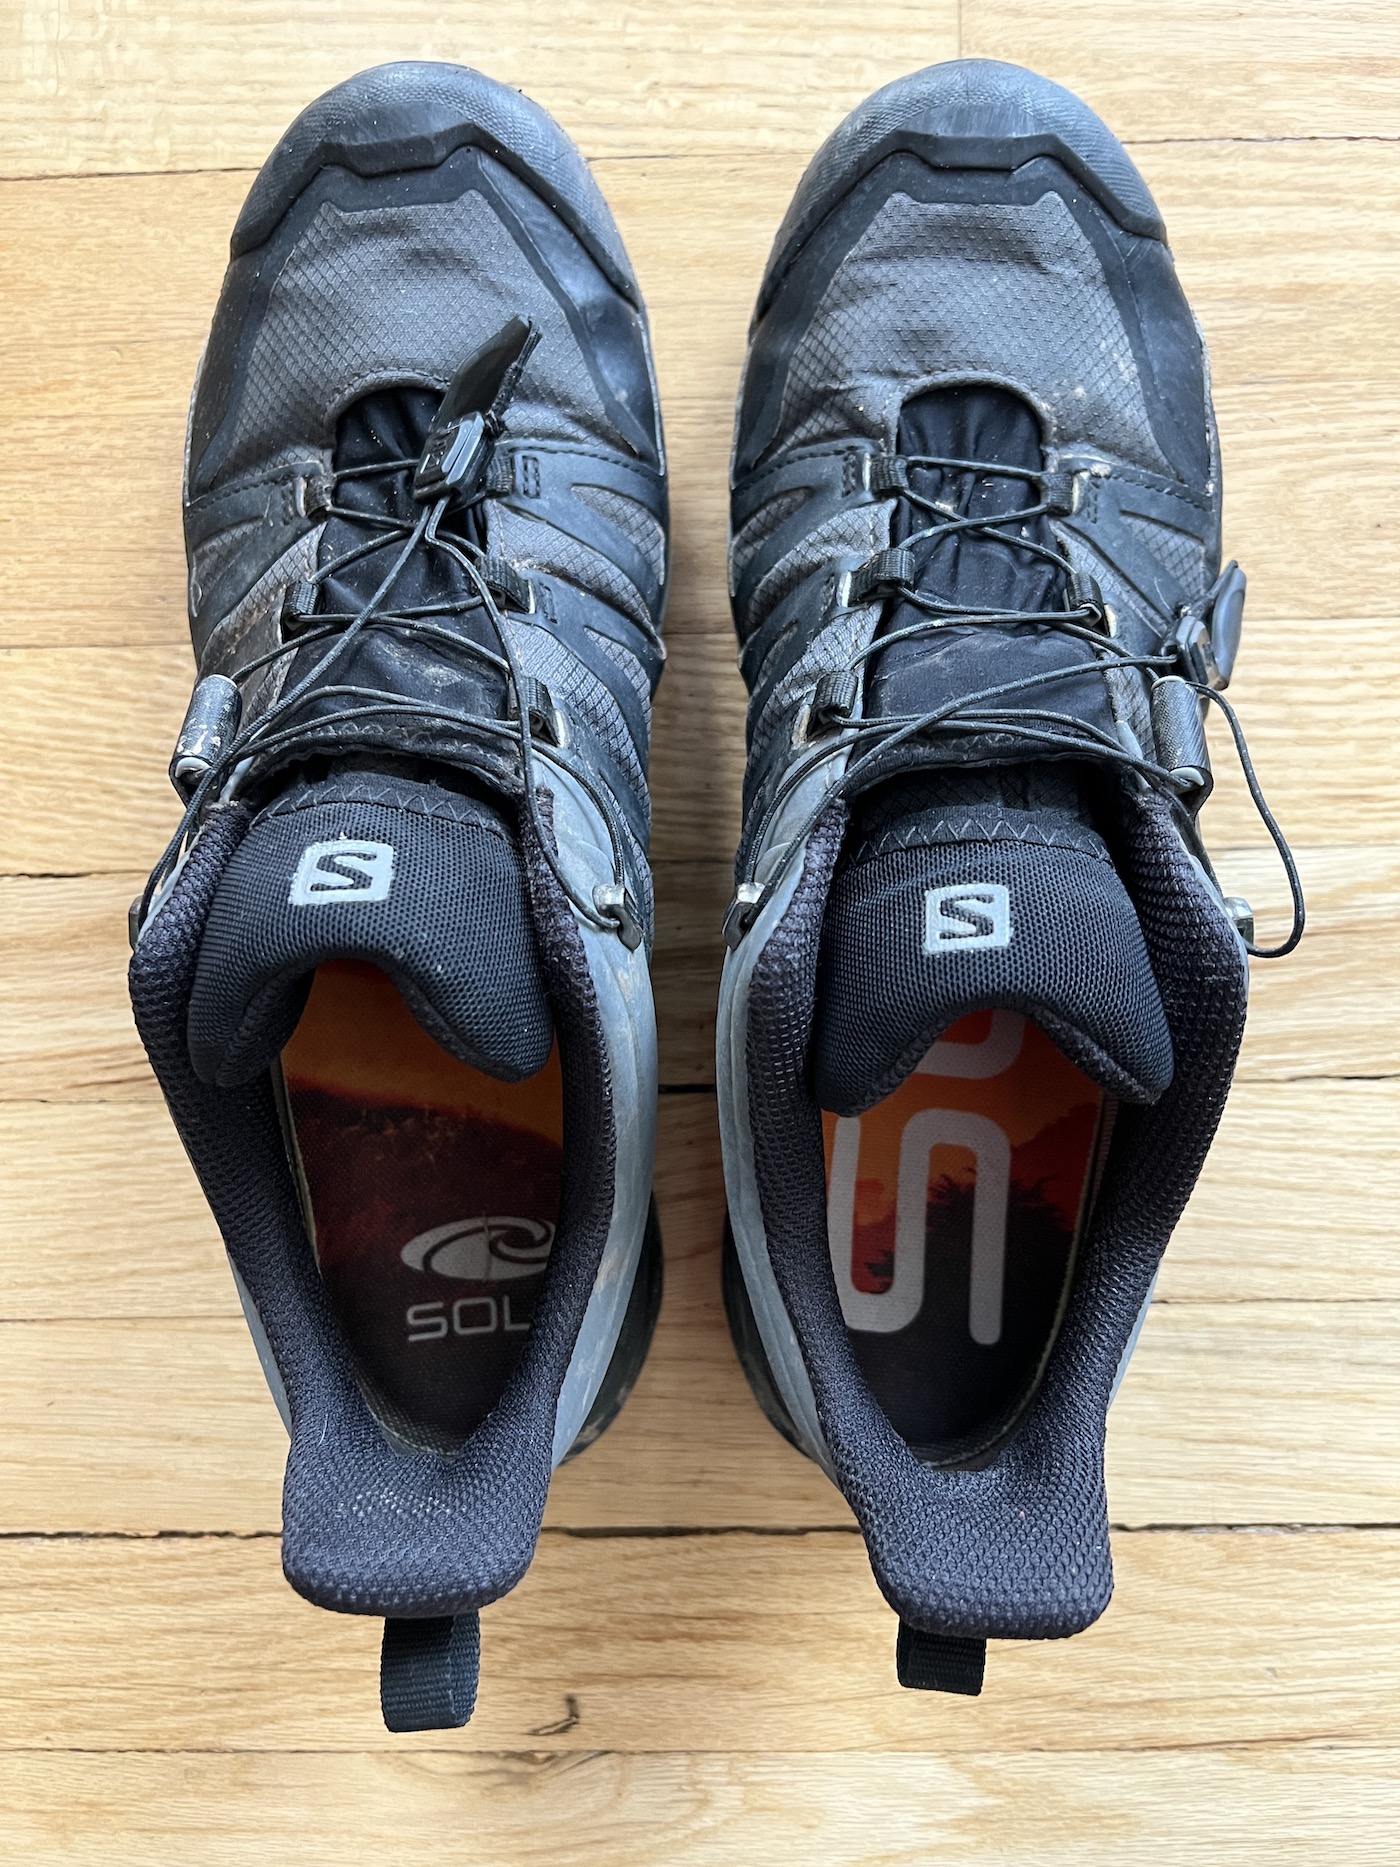 Best insoles for hiking in my hiking shoes